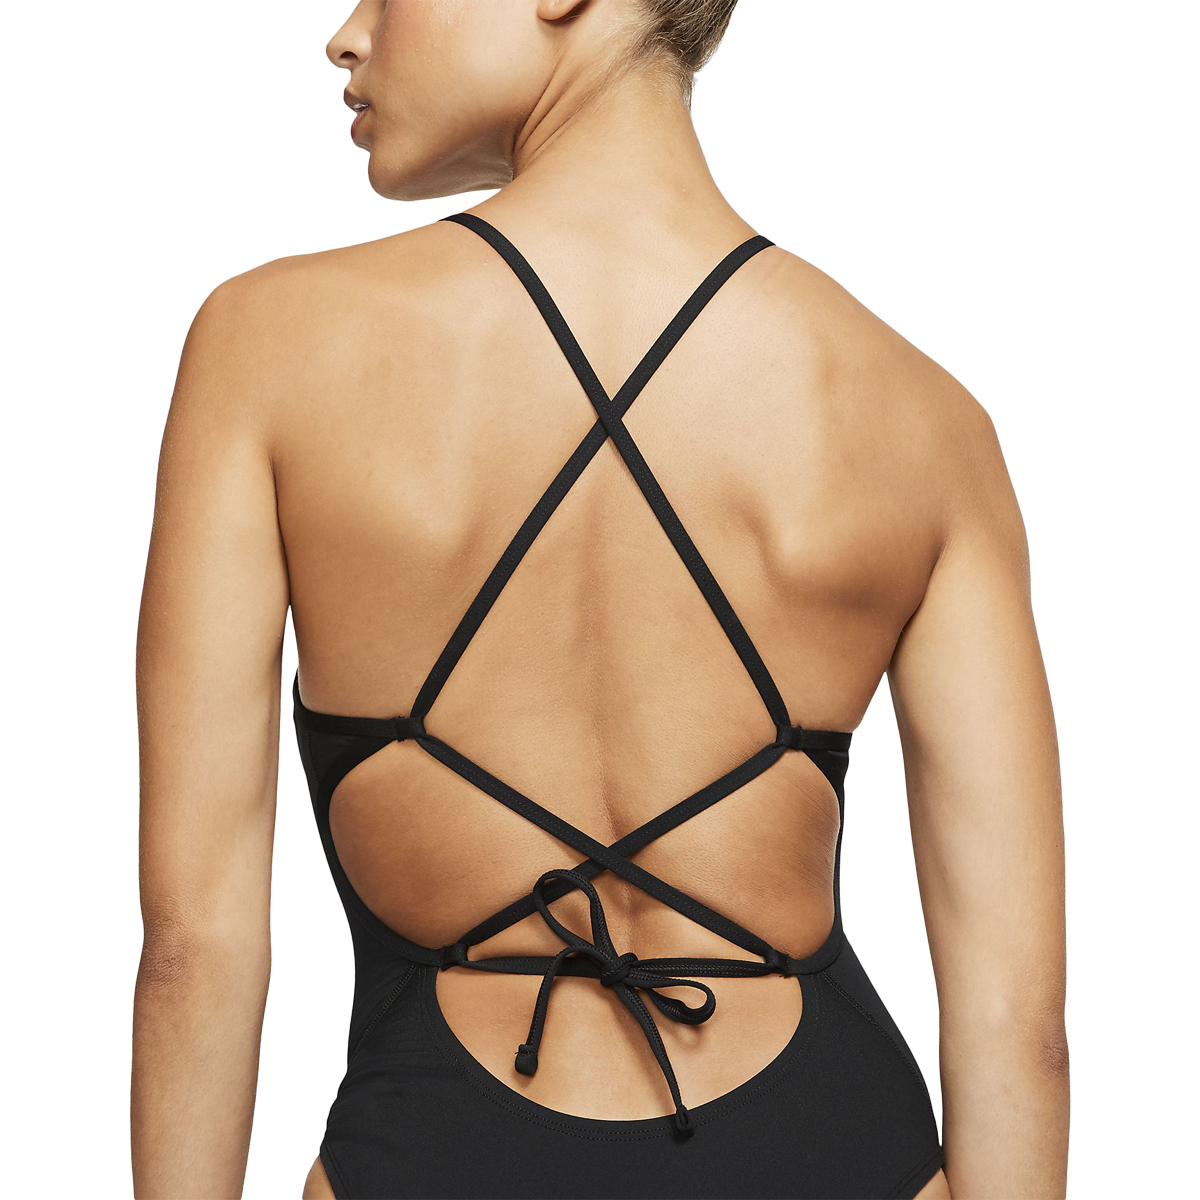 Women's Lace-Up Tie-Back alternate view